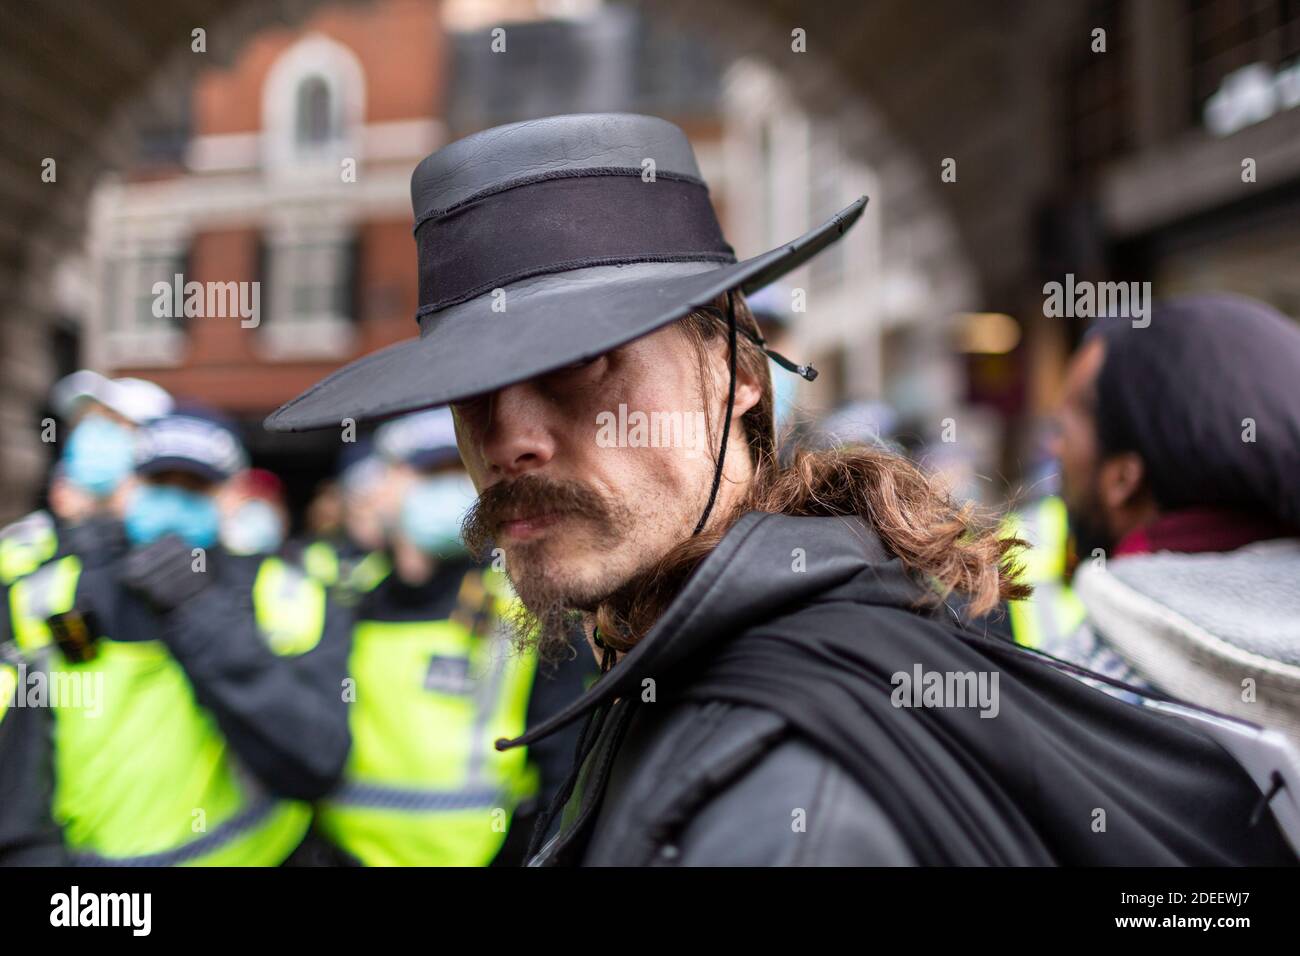 Anti-lockdown protest, Regent Street, London, 28 November 2020. A protester in Guy Fawkes costume stands in front of a line of police officers. Stock Photo